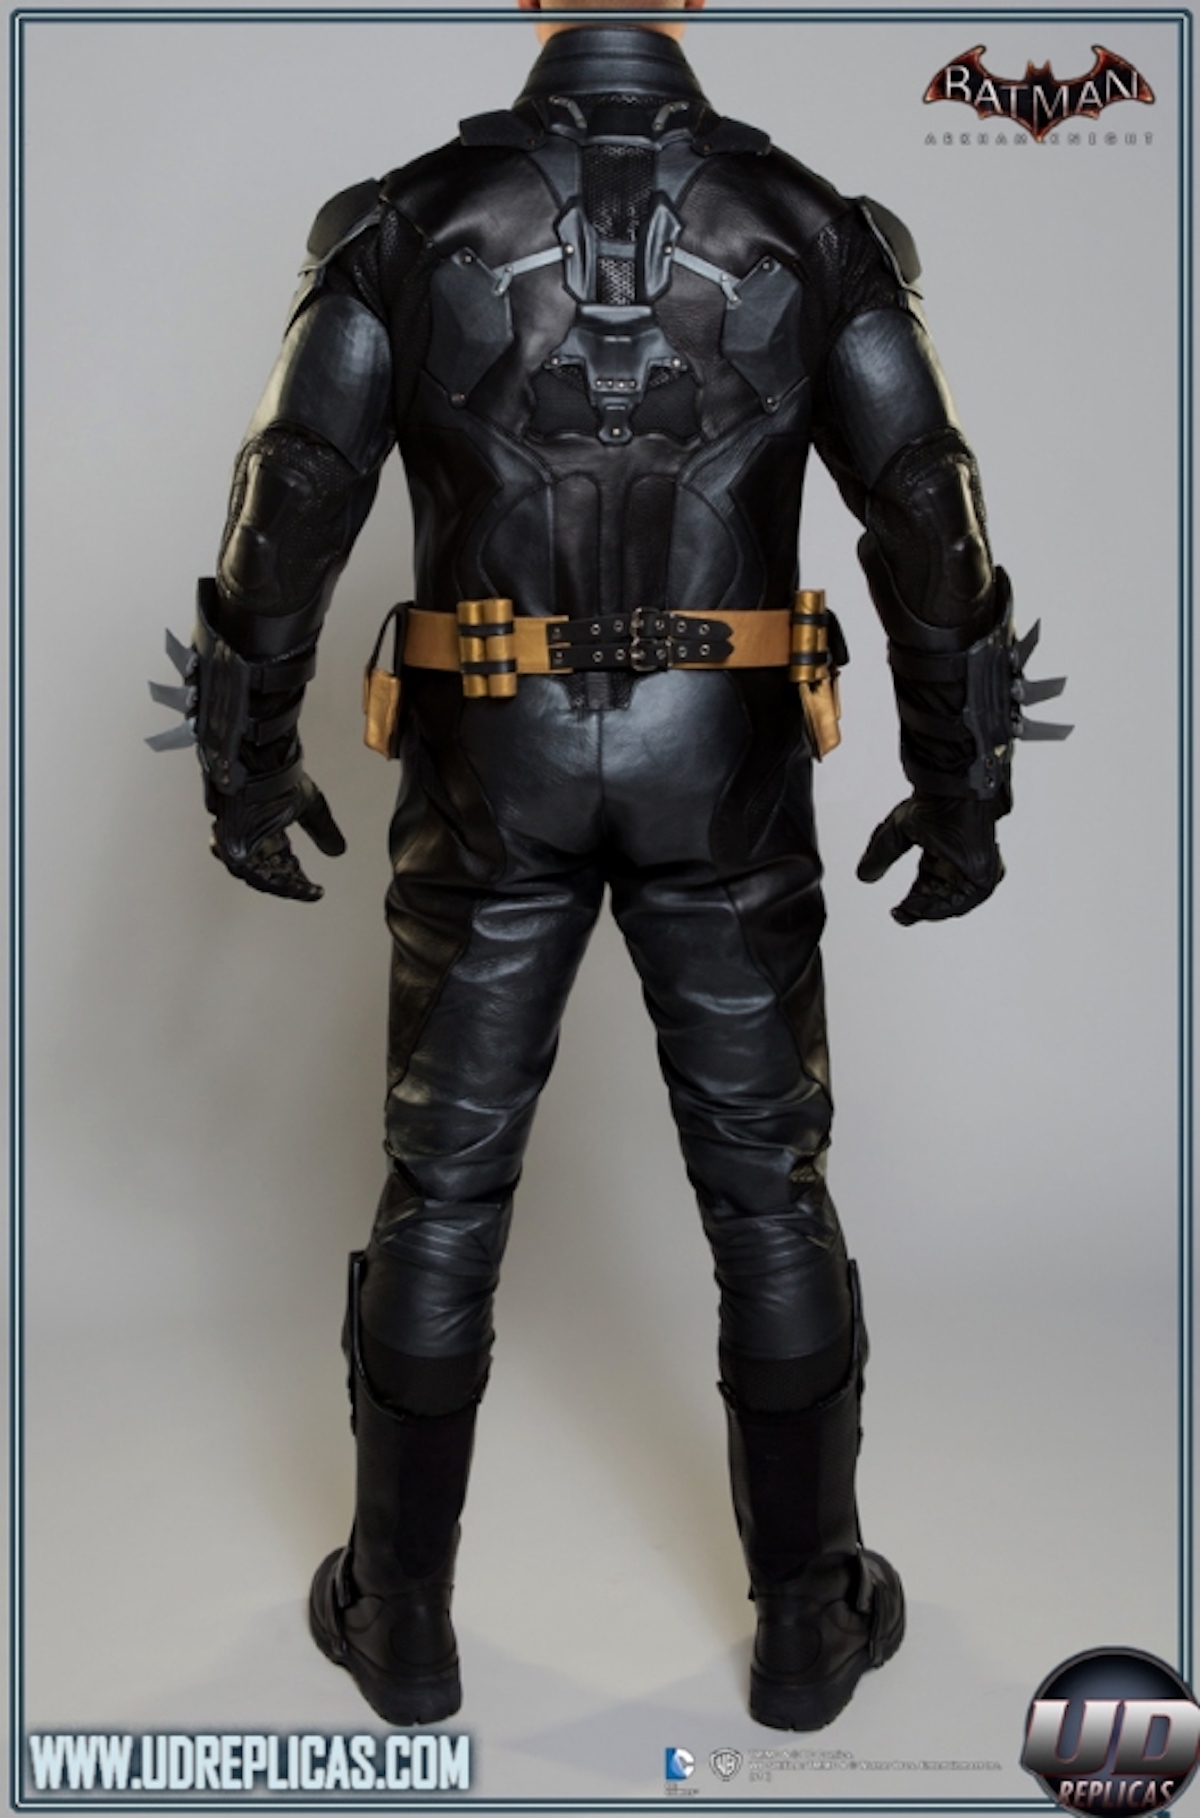 A back view of the BATMAN™: Arkham Knight Leather Motorcycle Suit from UD Replicas